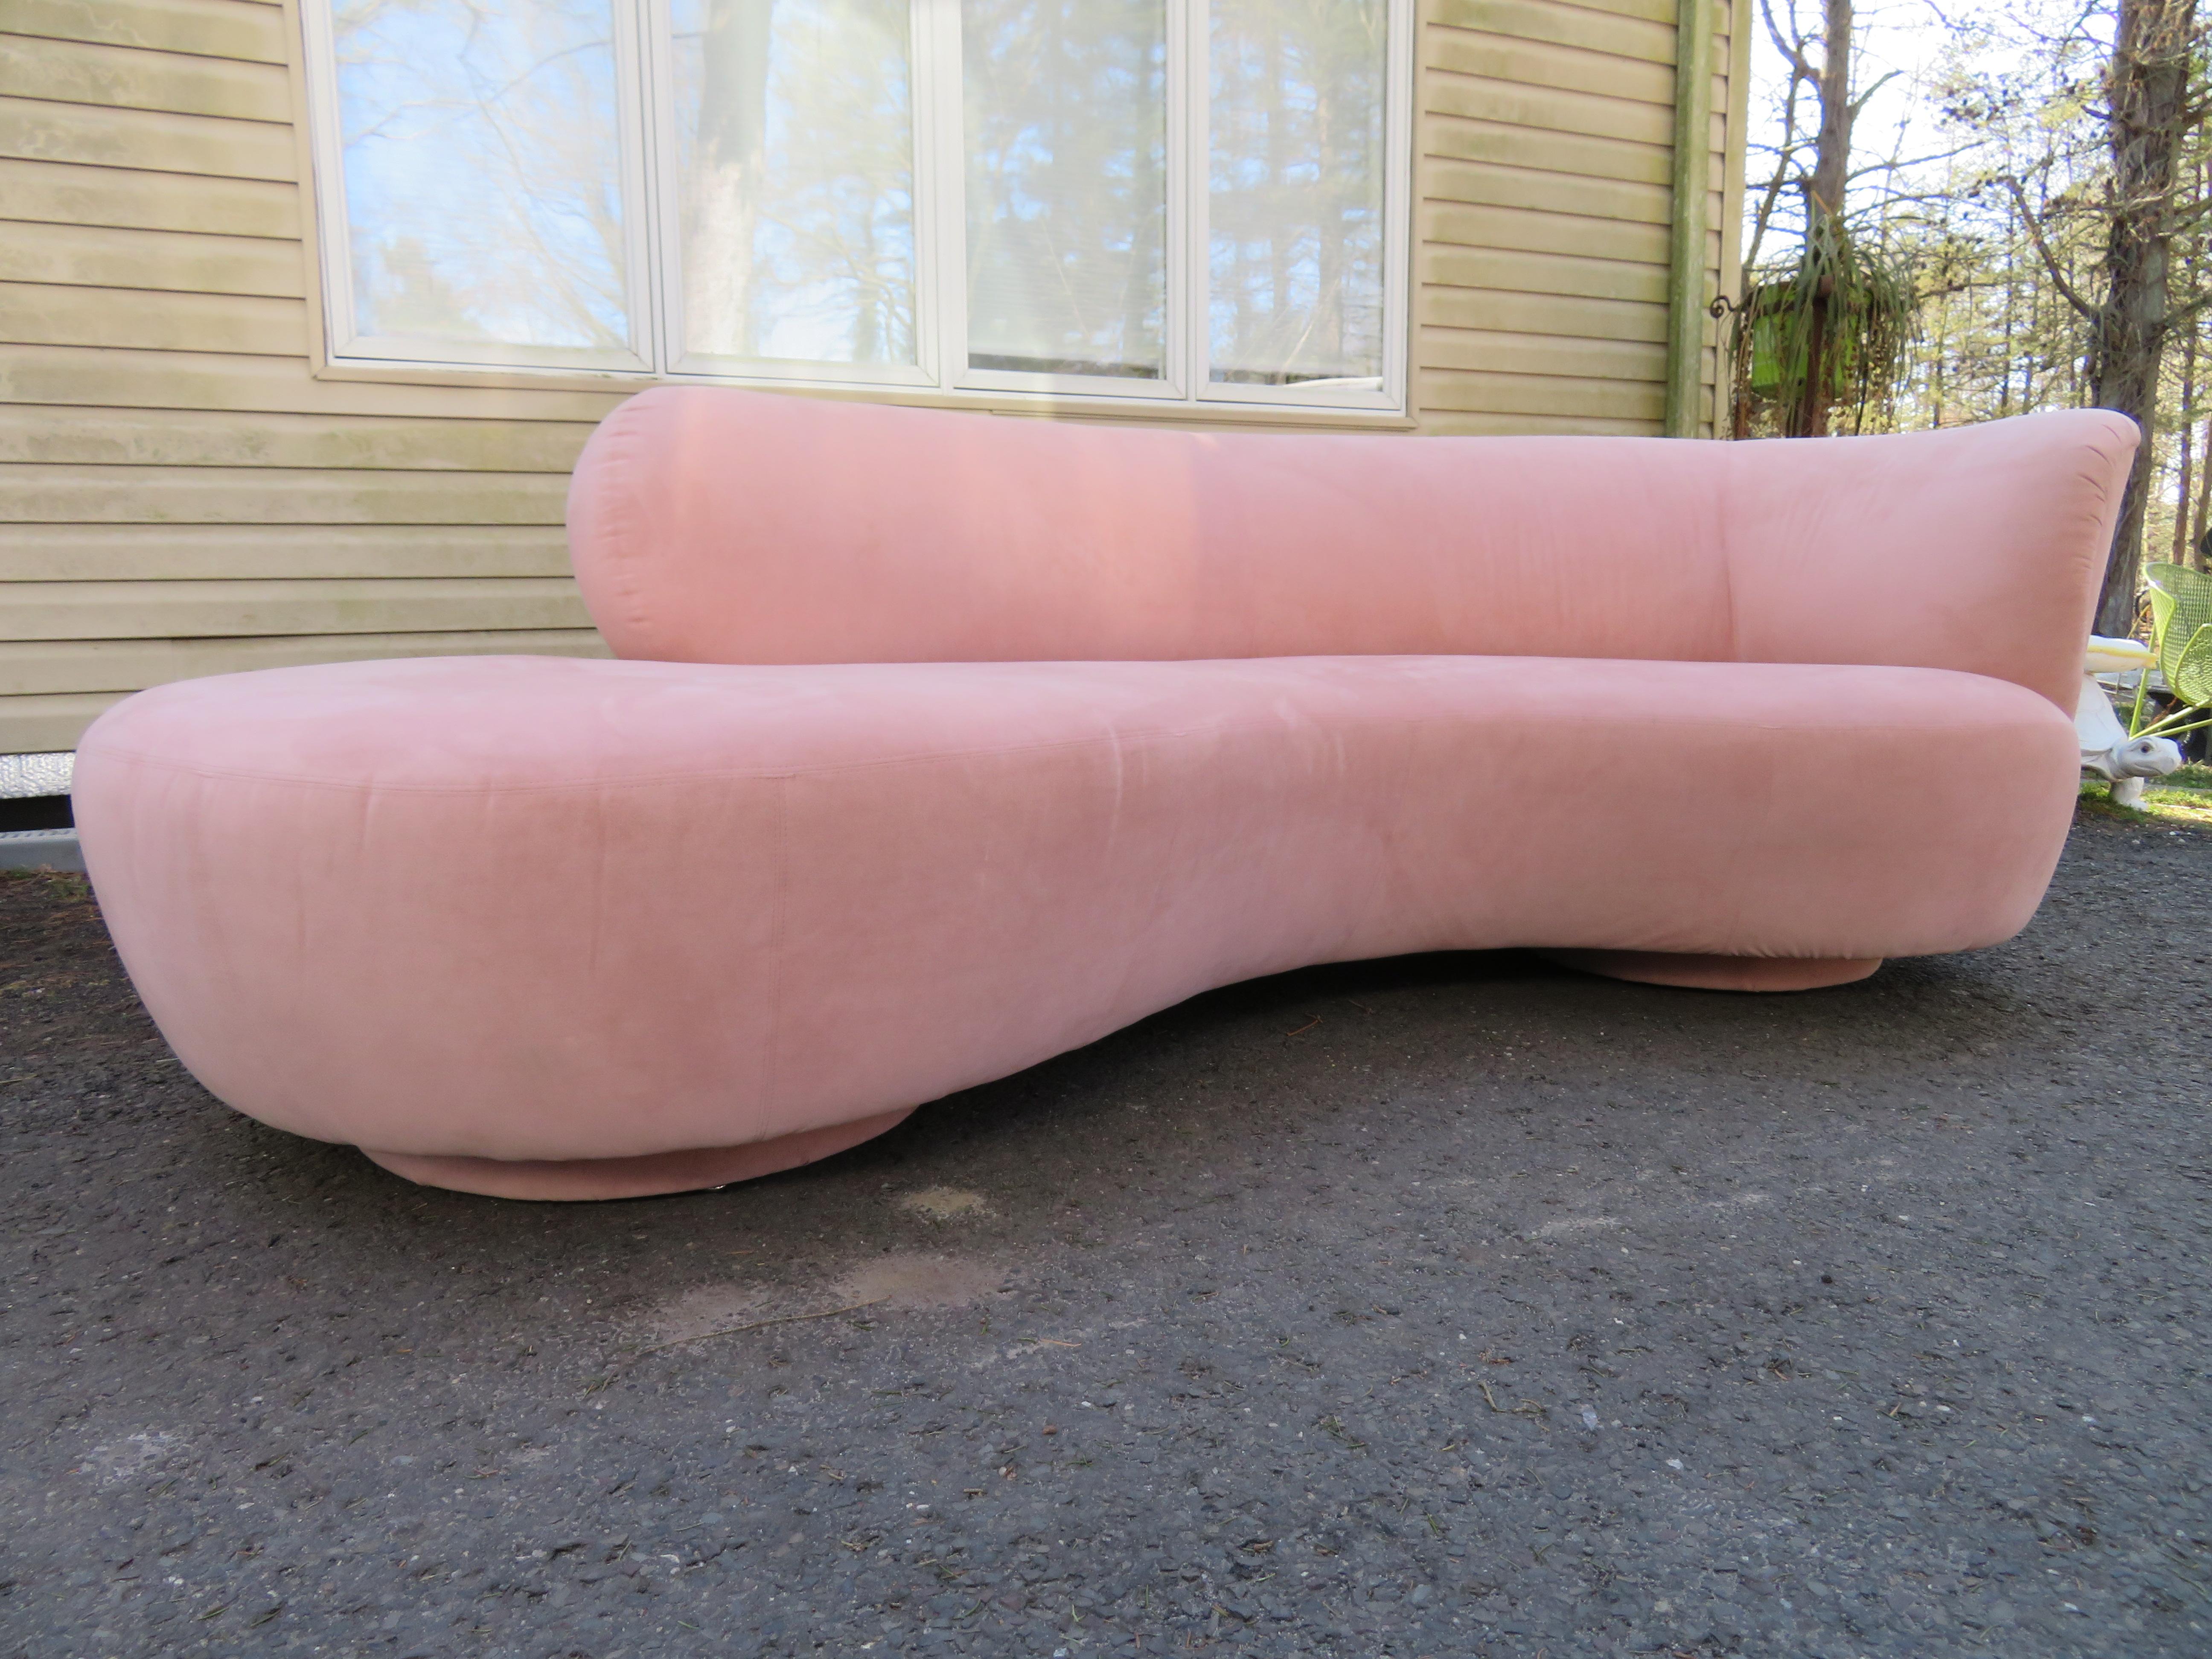 Lovely Weiman curved cloud sofa in the style of Vladimir Kagan. The original fabric is a blush ballet slipper pink and still looks great-only minor signs of age. This sofa measures 30